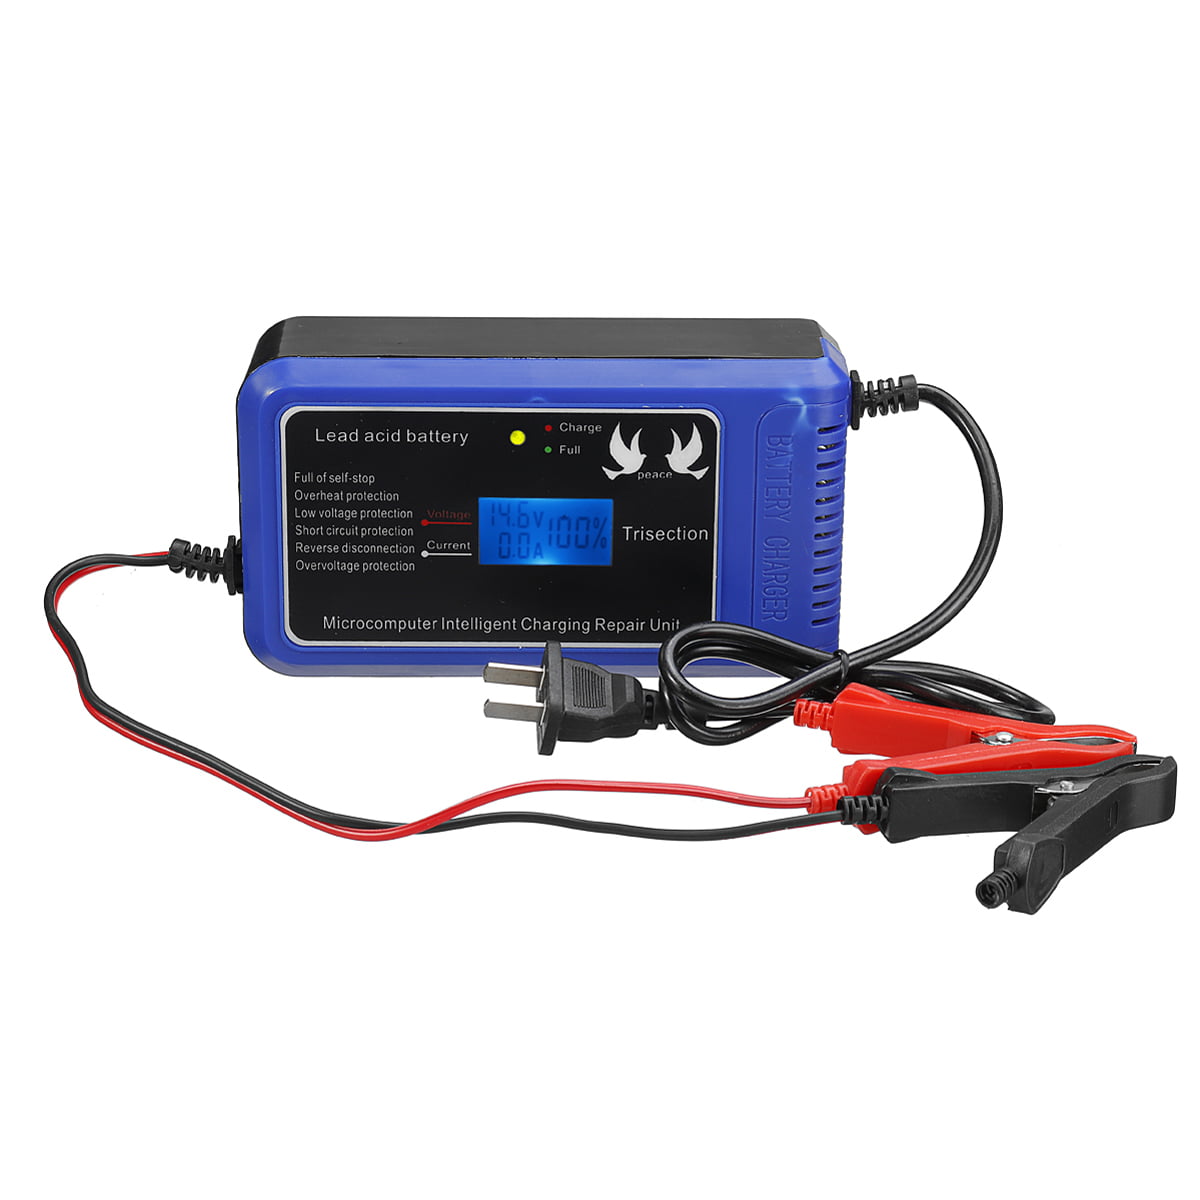 110V-230V Quick Charge High Efficiency Battery Charger/Maintainer with